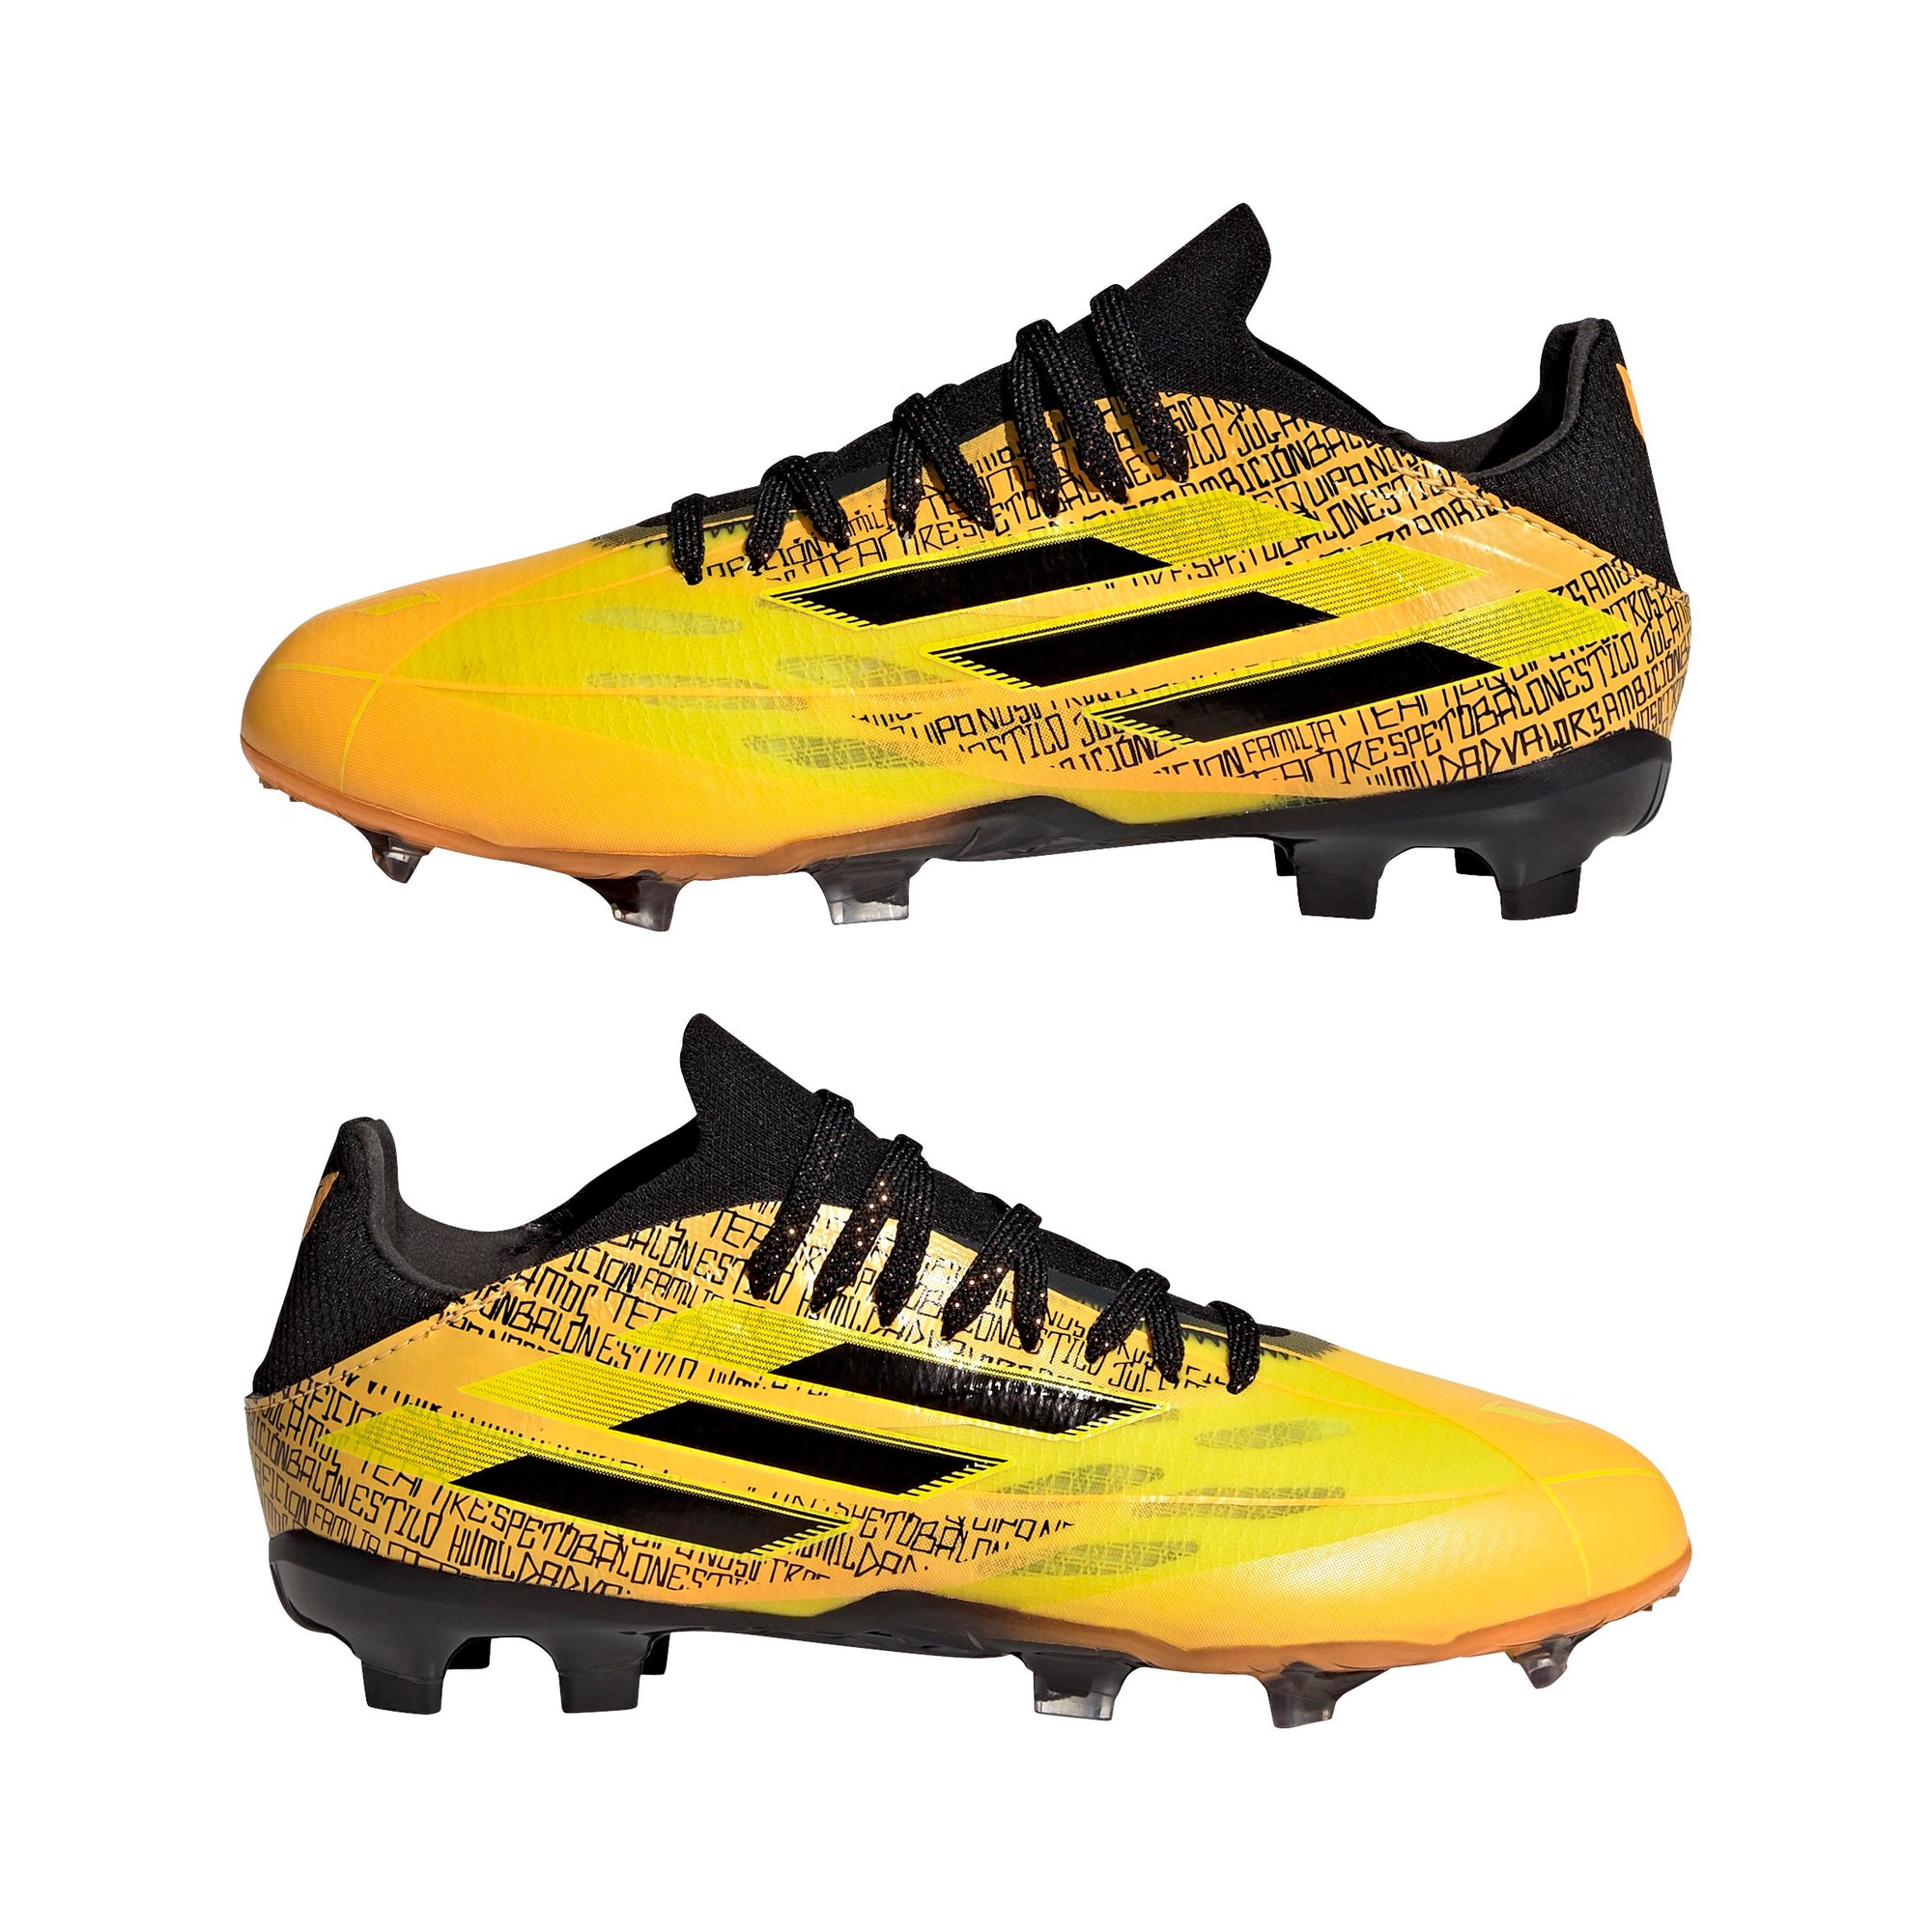 adidas Youth X Speedflow Messi.1 Firm Ground Cleats | GW7418 Cleats Adidas 